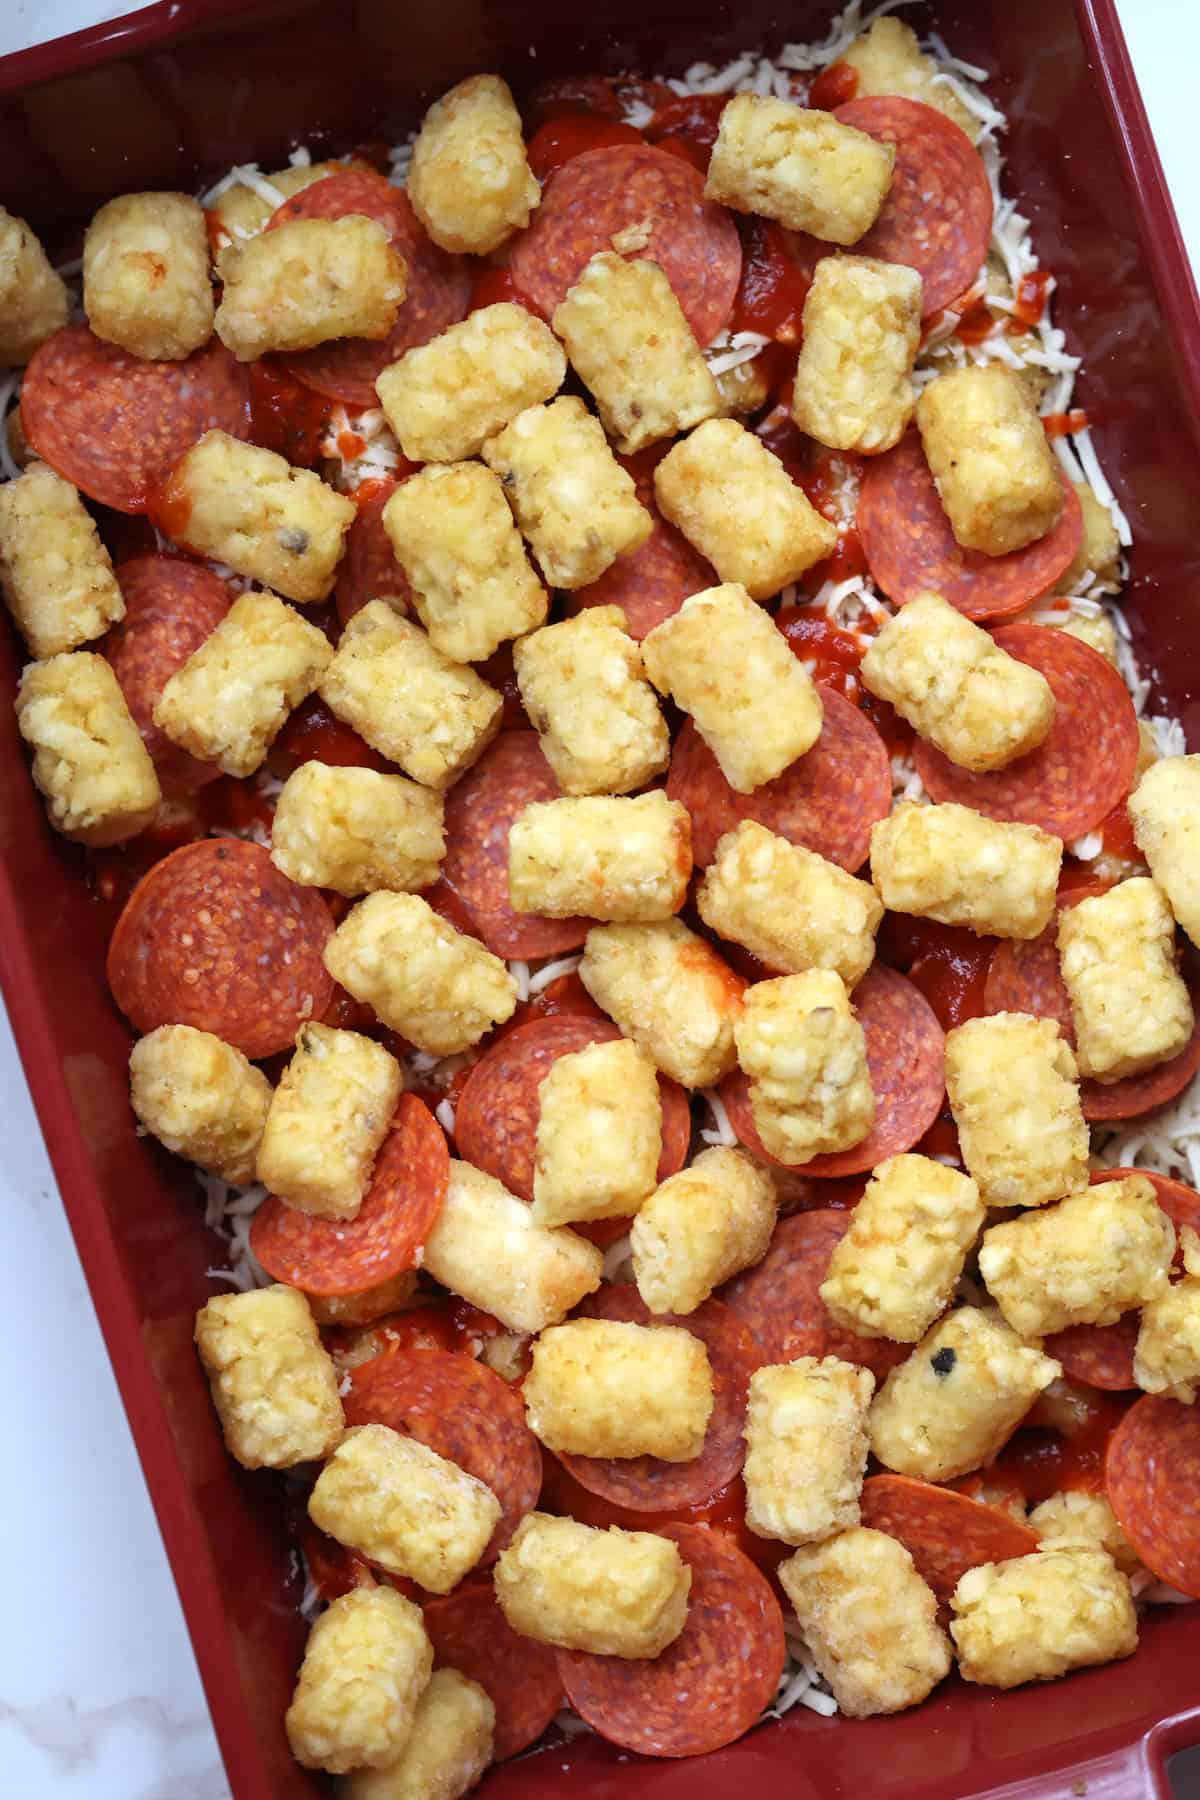 tater tots on top of pepperoni and pizza sauce in a casserole dish